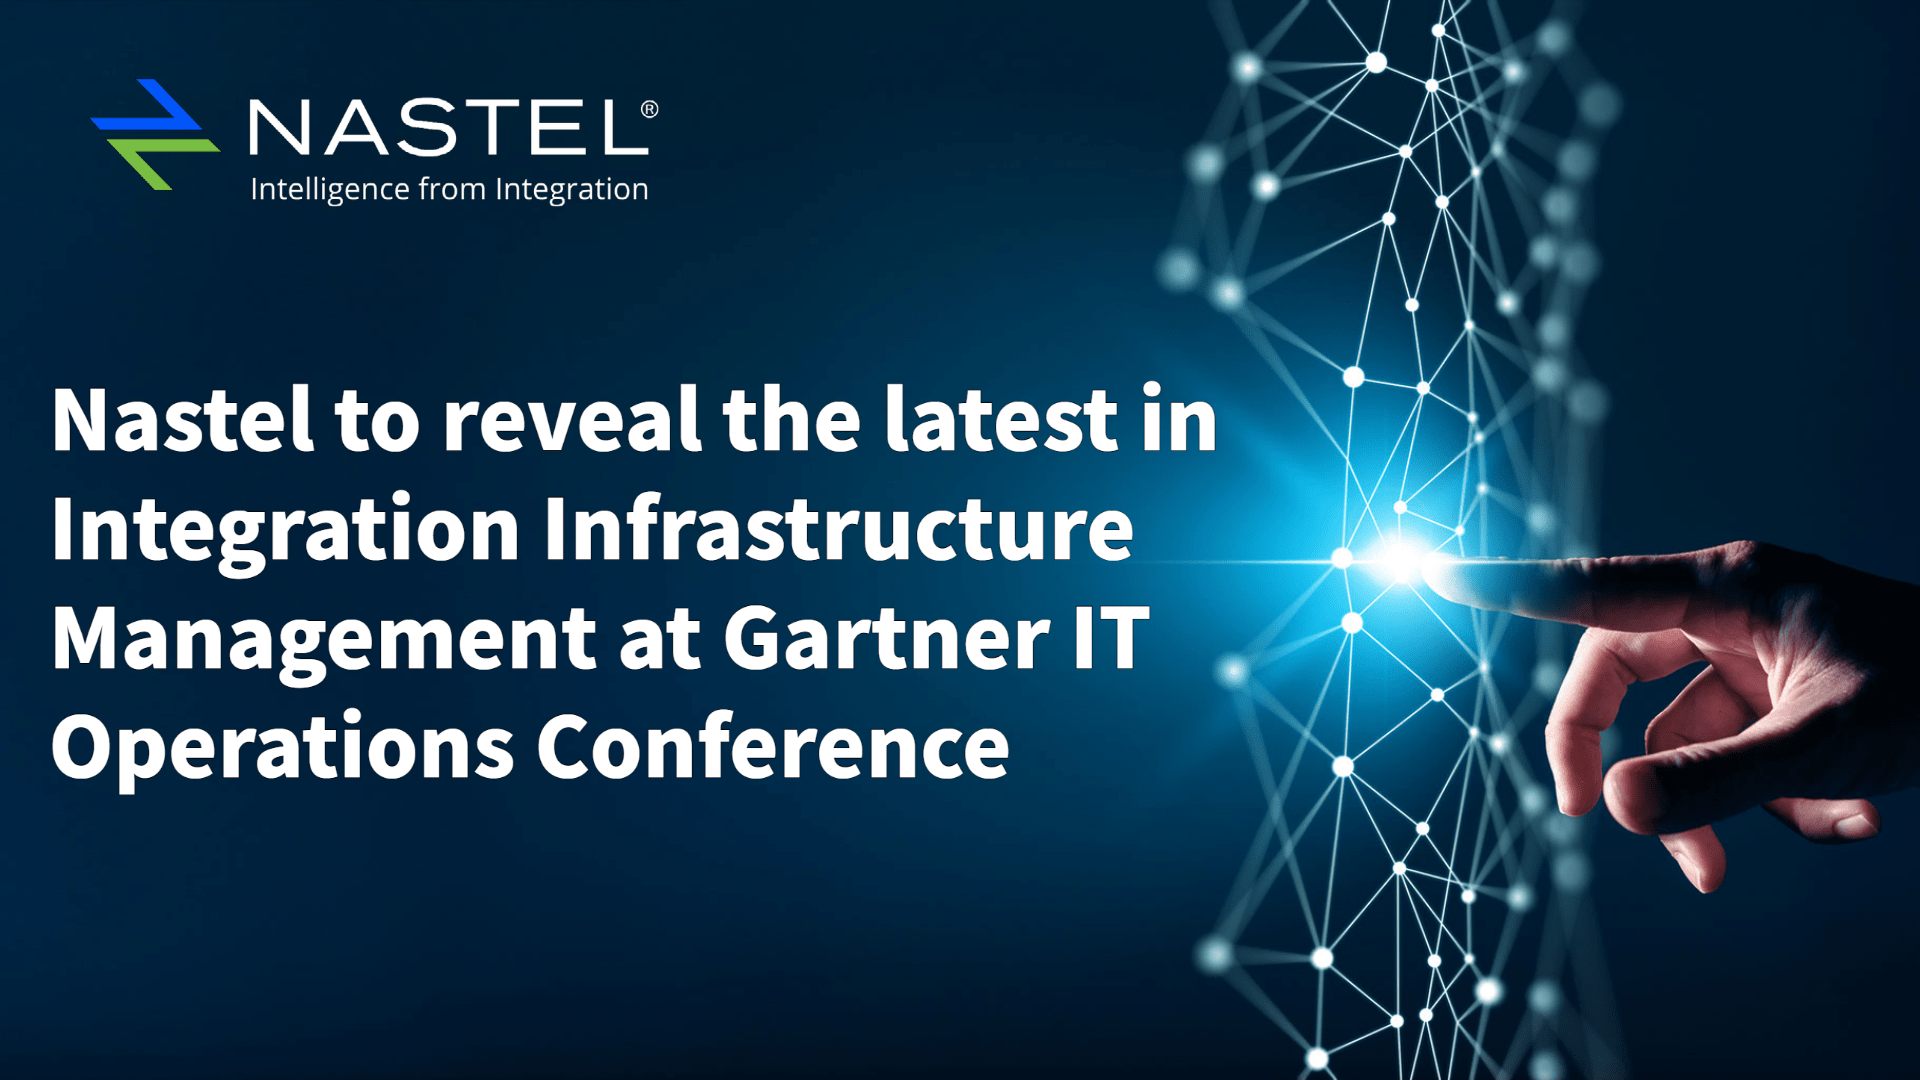 Nastel To Reveal The Latest In Integration Infrastructure Management At Gartner IT Operations Conference